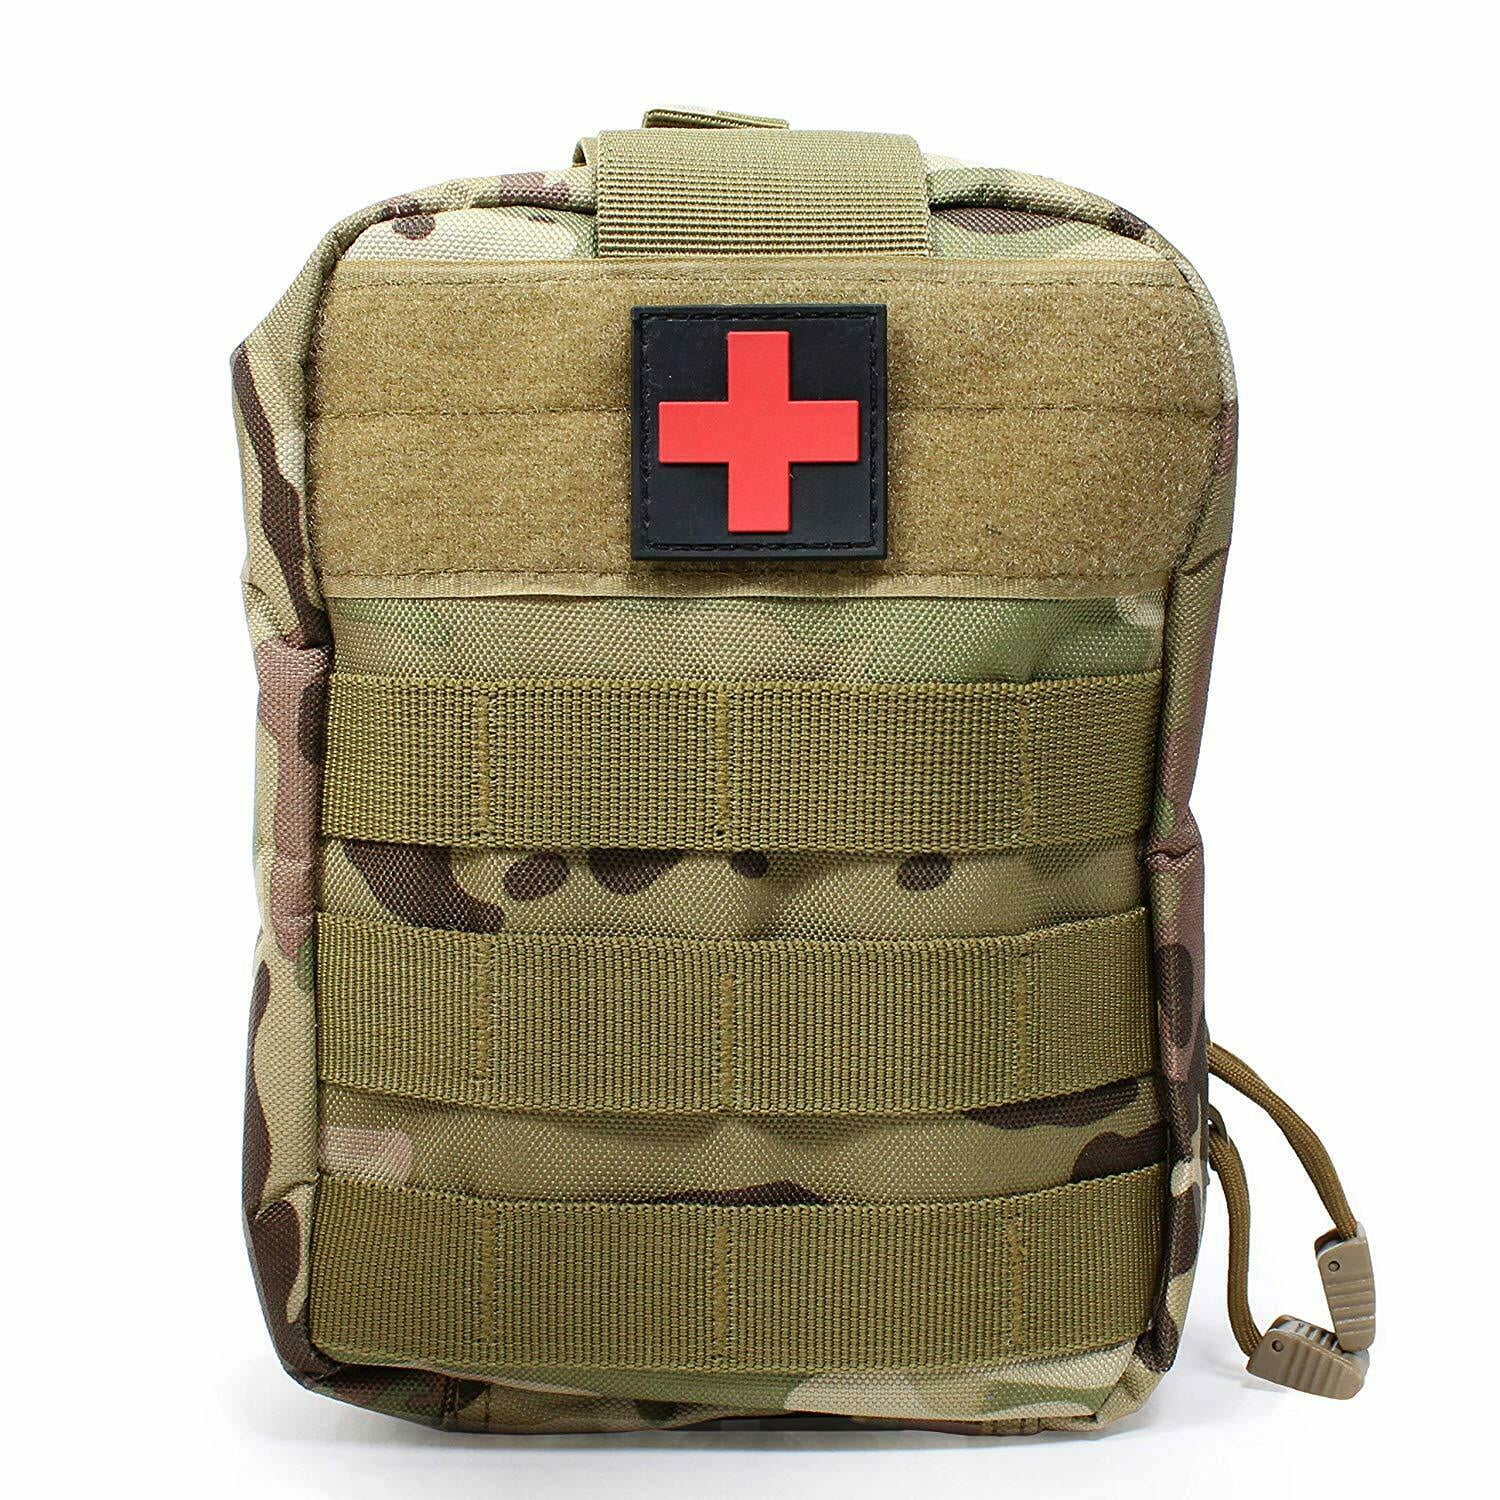 Durable Tactical MOLLE Rip-Away EMT IFAK Medical Pouch First Aid Kit Utility Bag 